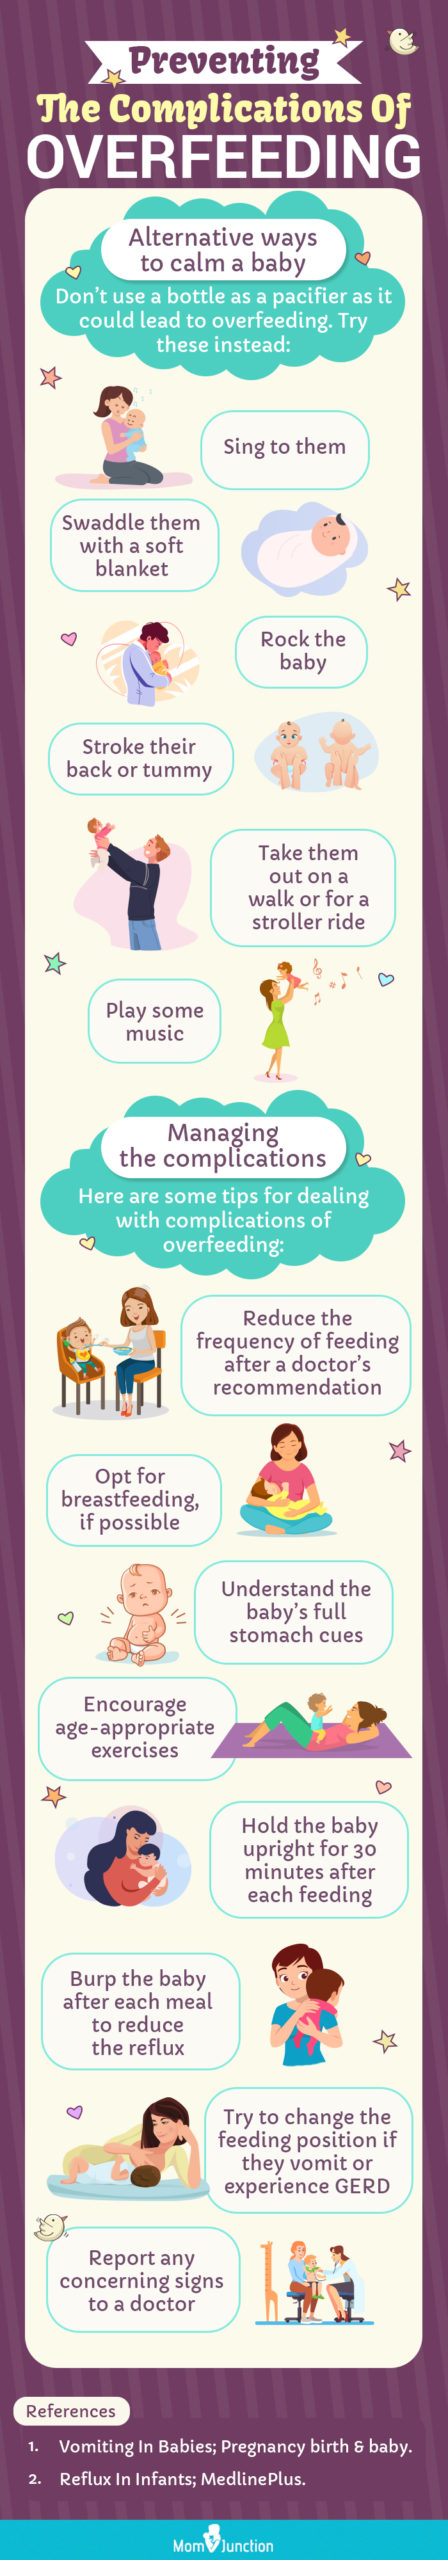 preventing the complication of overfeeding [infographic]